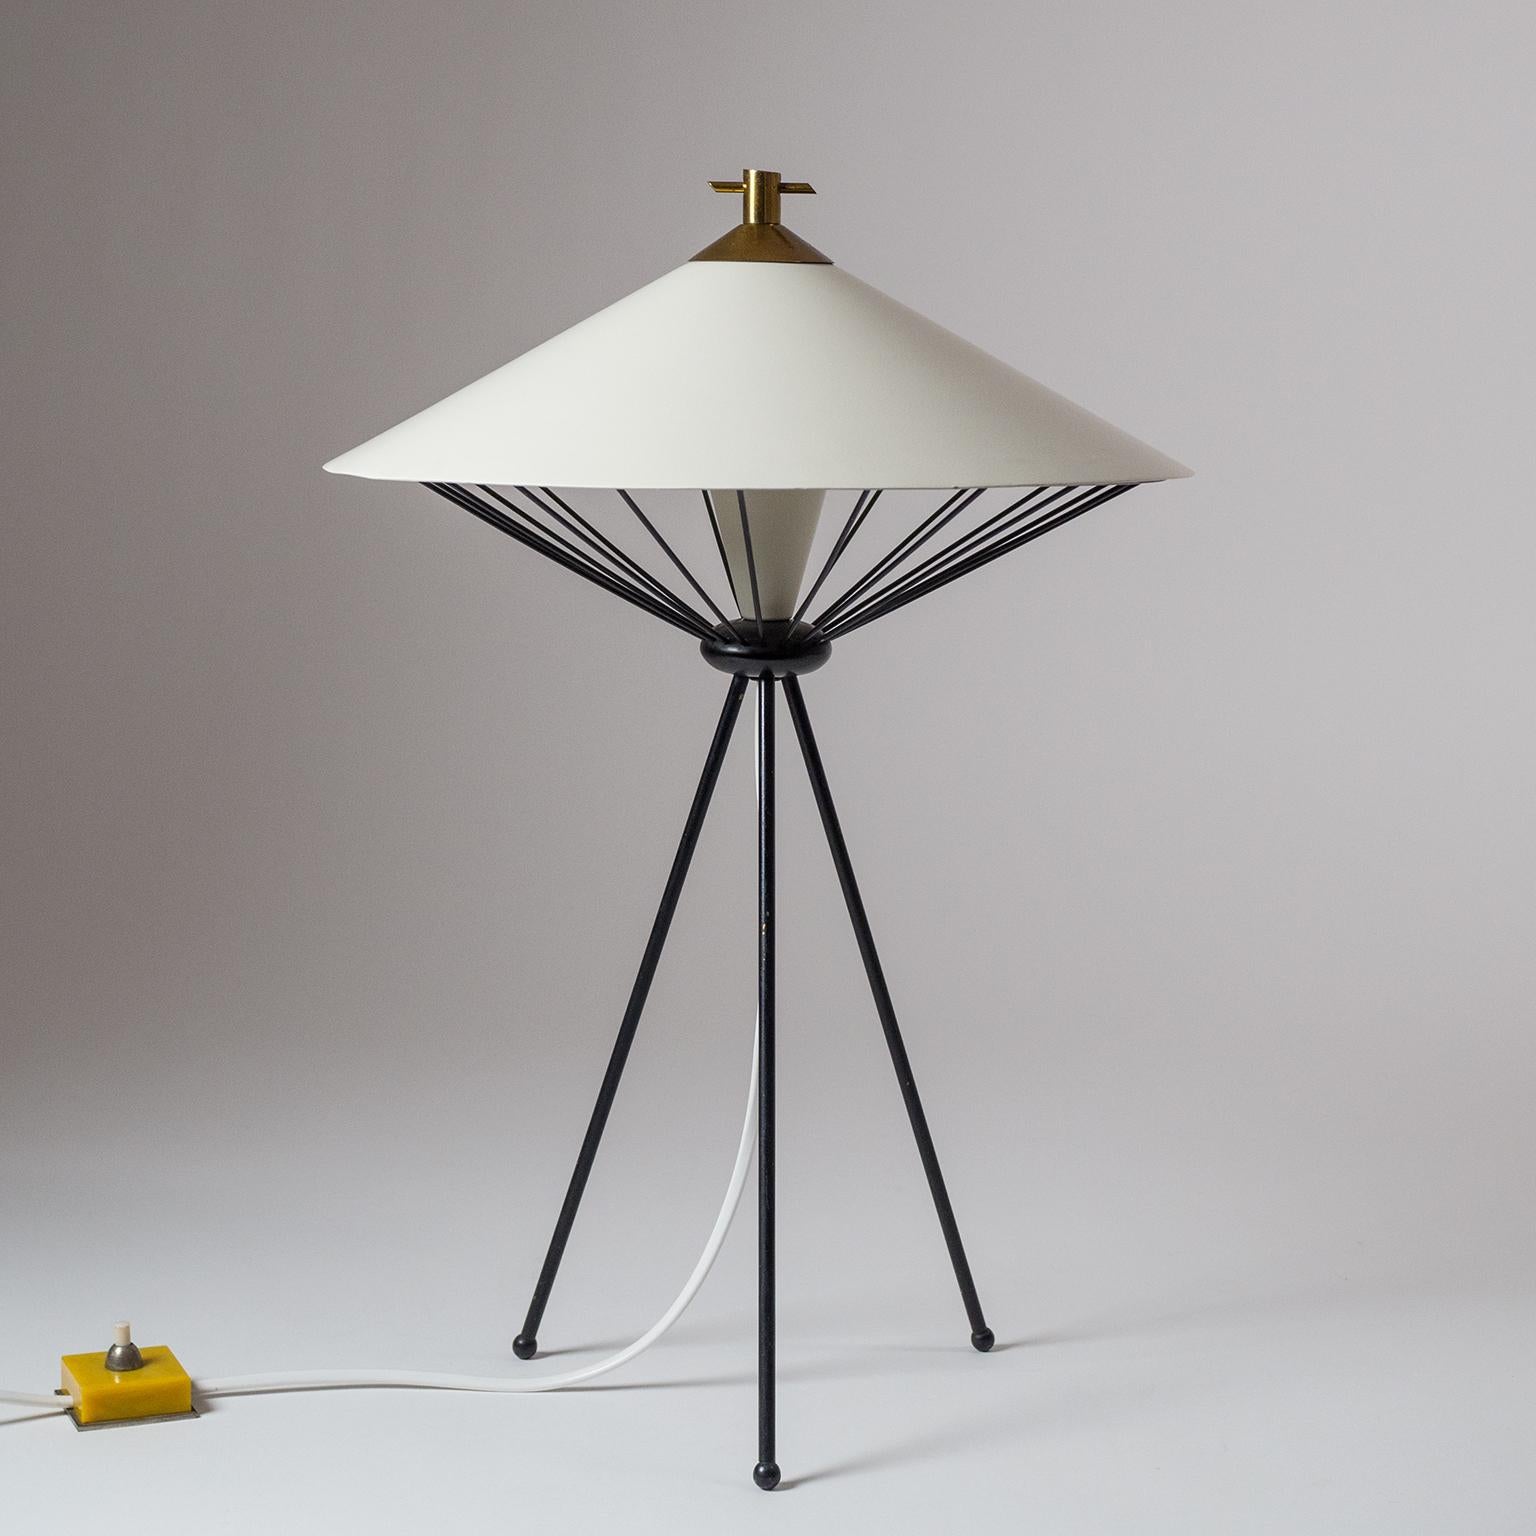 Very unique Italian sputnik table or desk lamp with a tripod base. The 